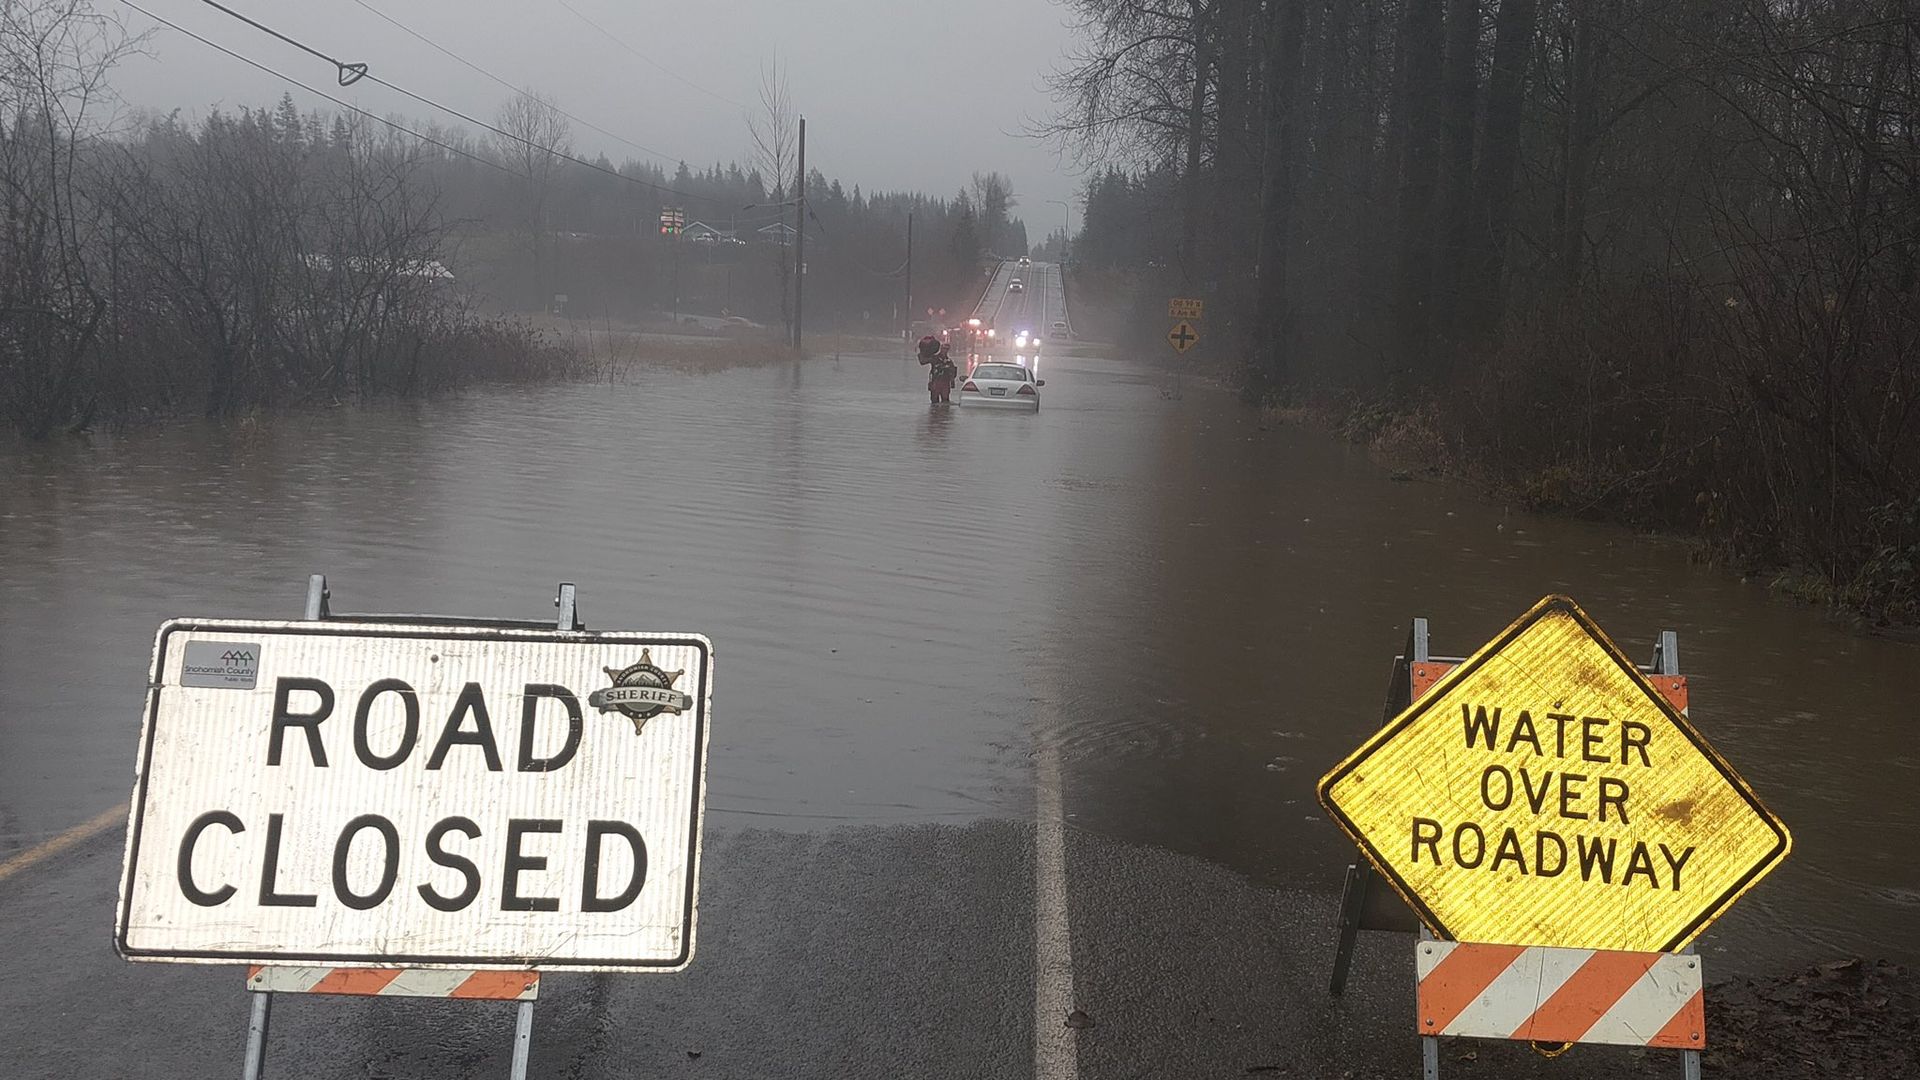 A woman stands near her partially submerged car on a road that was closed due to flooding in Snohomish County, Washington.